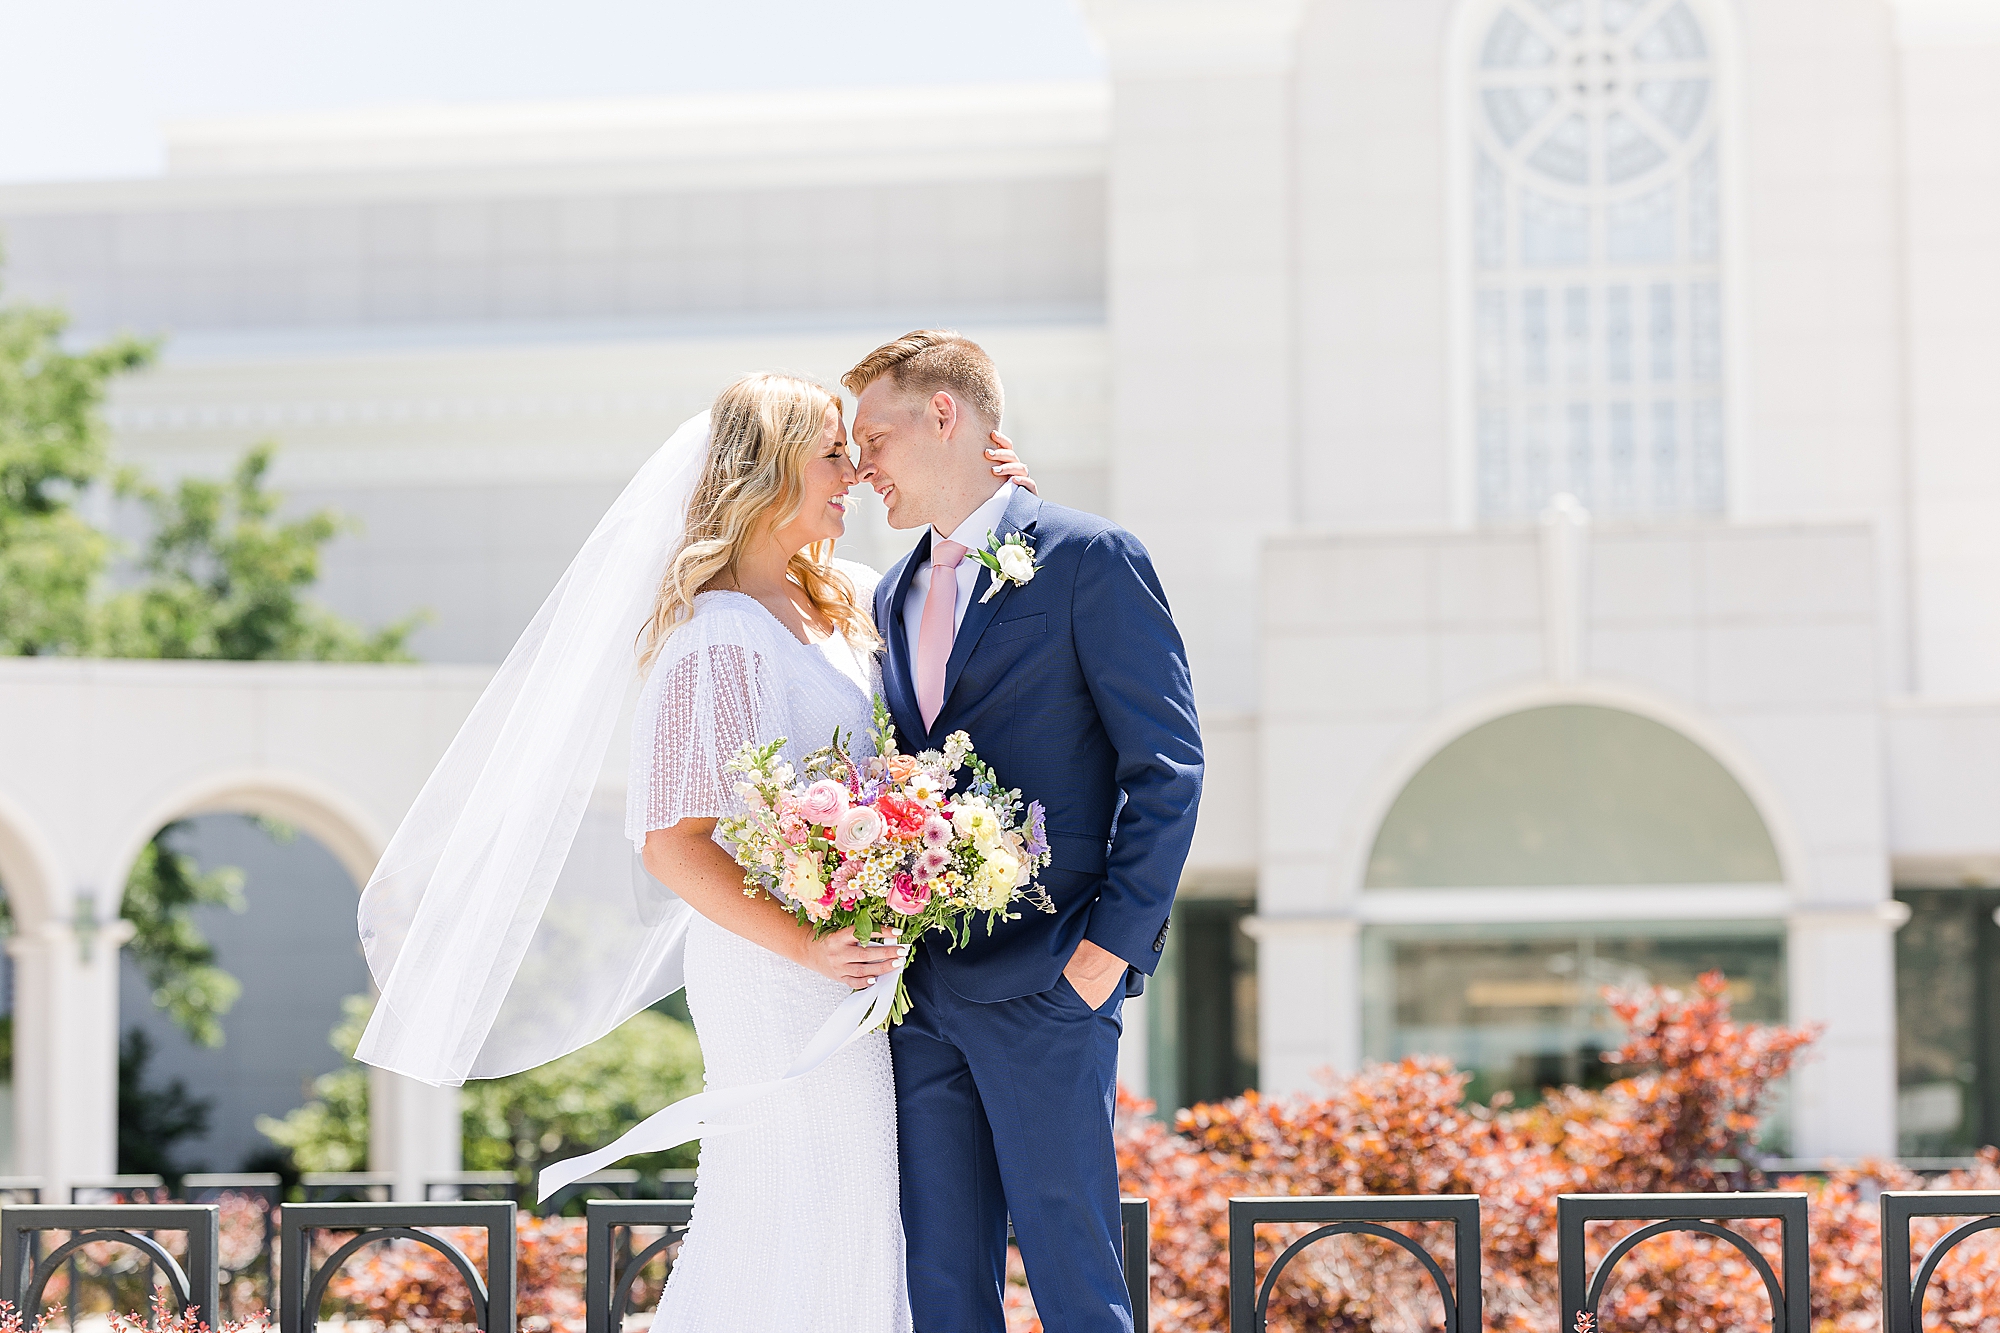 The bride and groom enjoying a moment outside the Bountiful Utah Temple